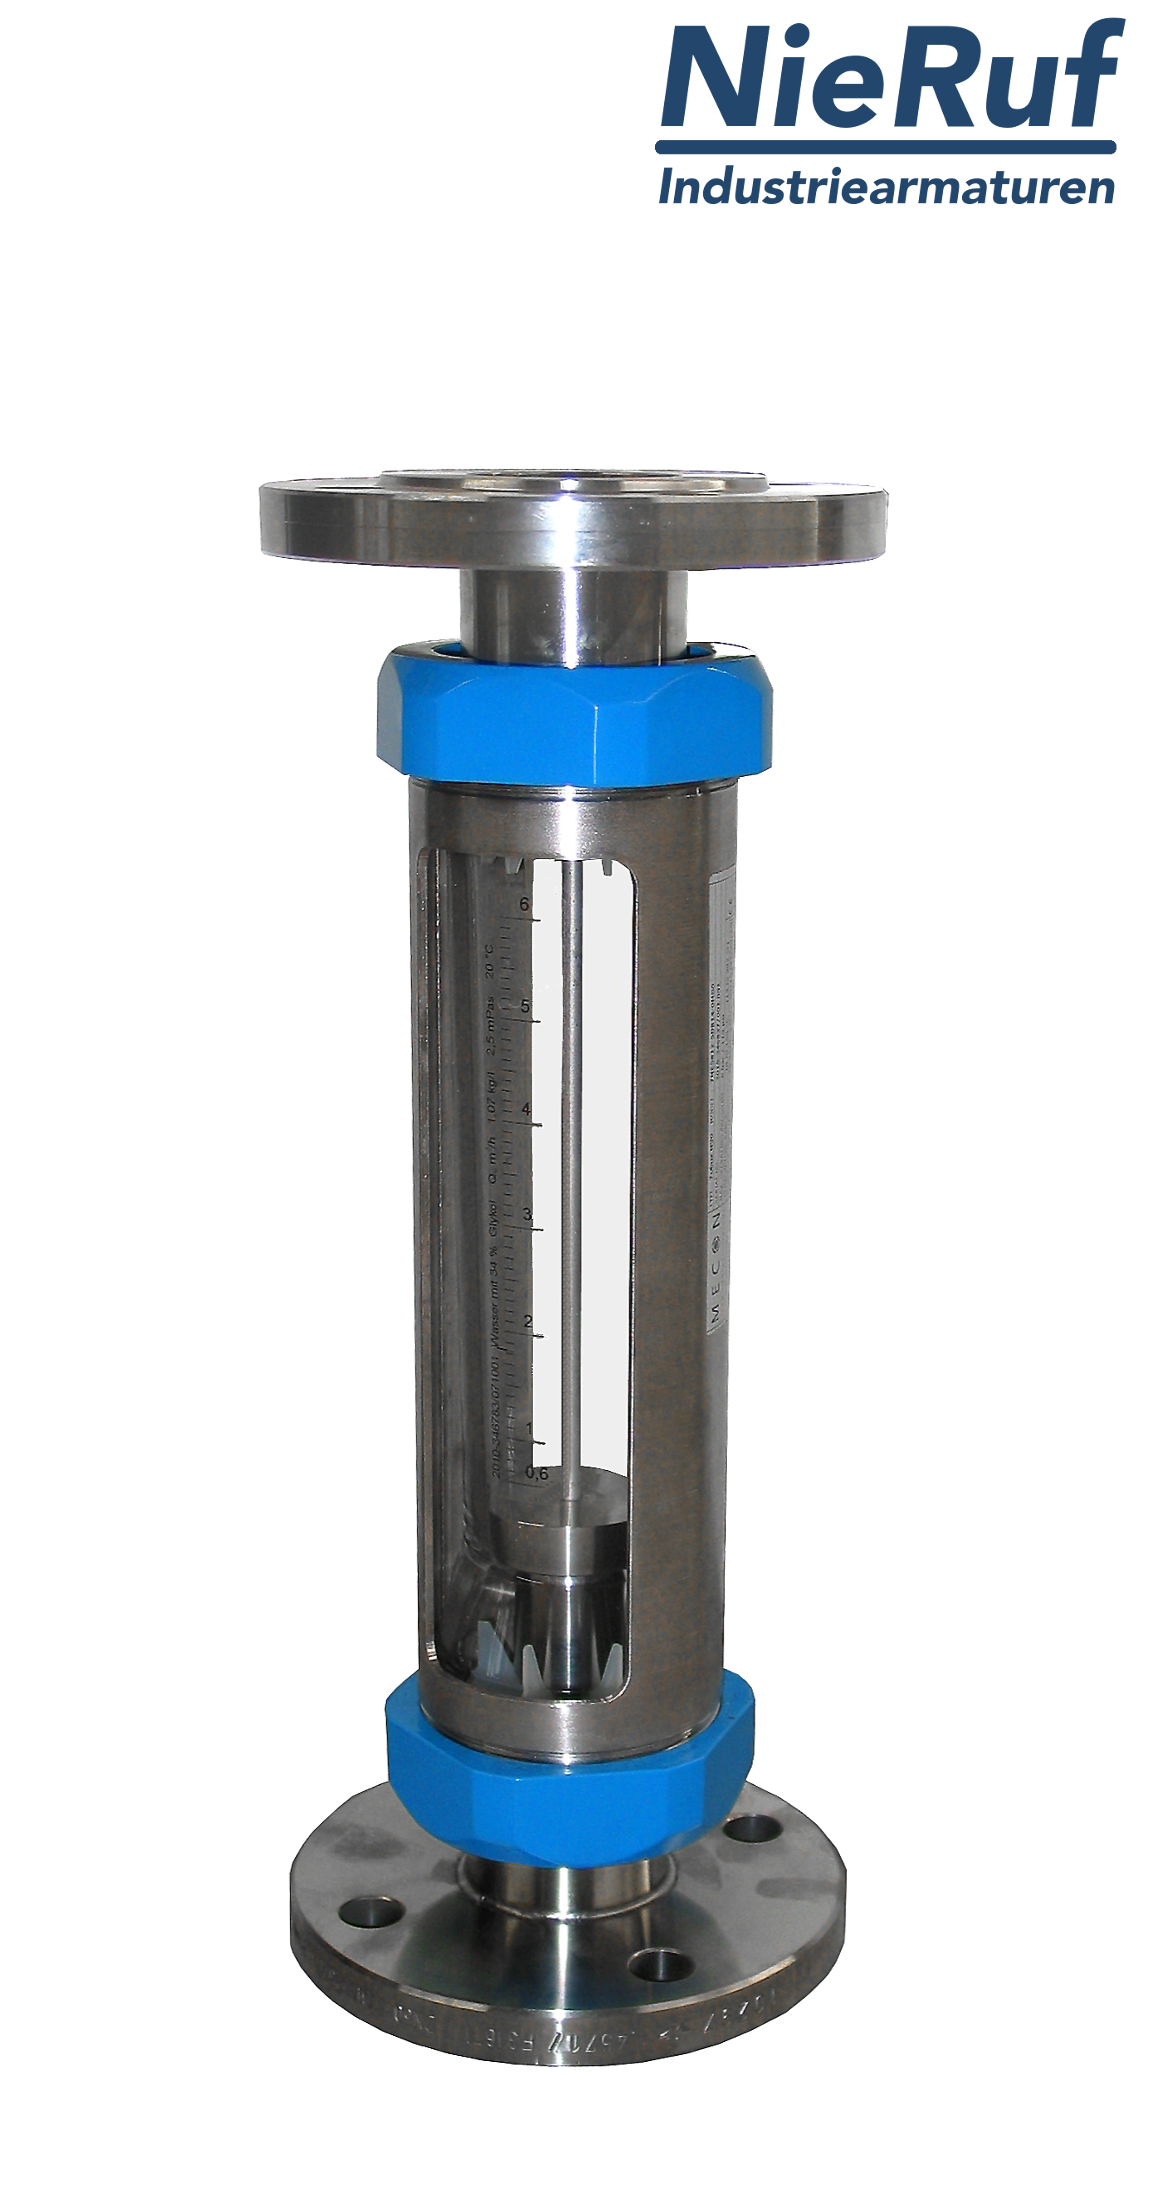 Variable area flowmeter stainless steel + borosilicate flange DN40 200.0 - 2000 l/h water FKM